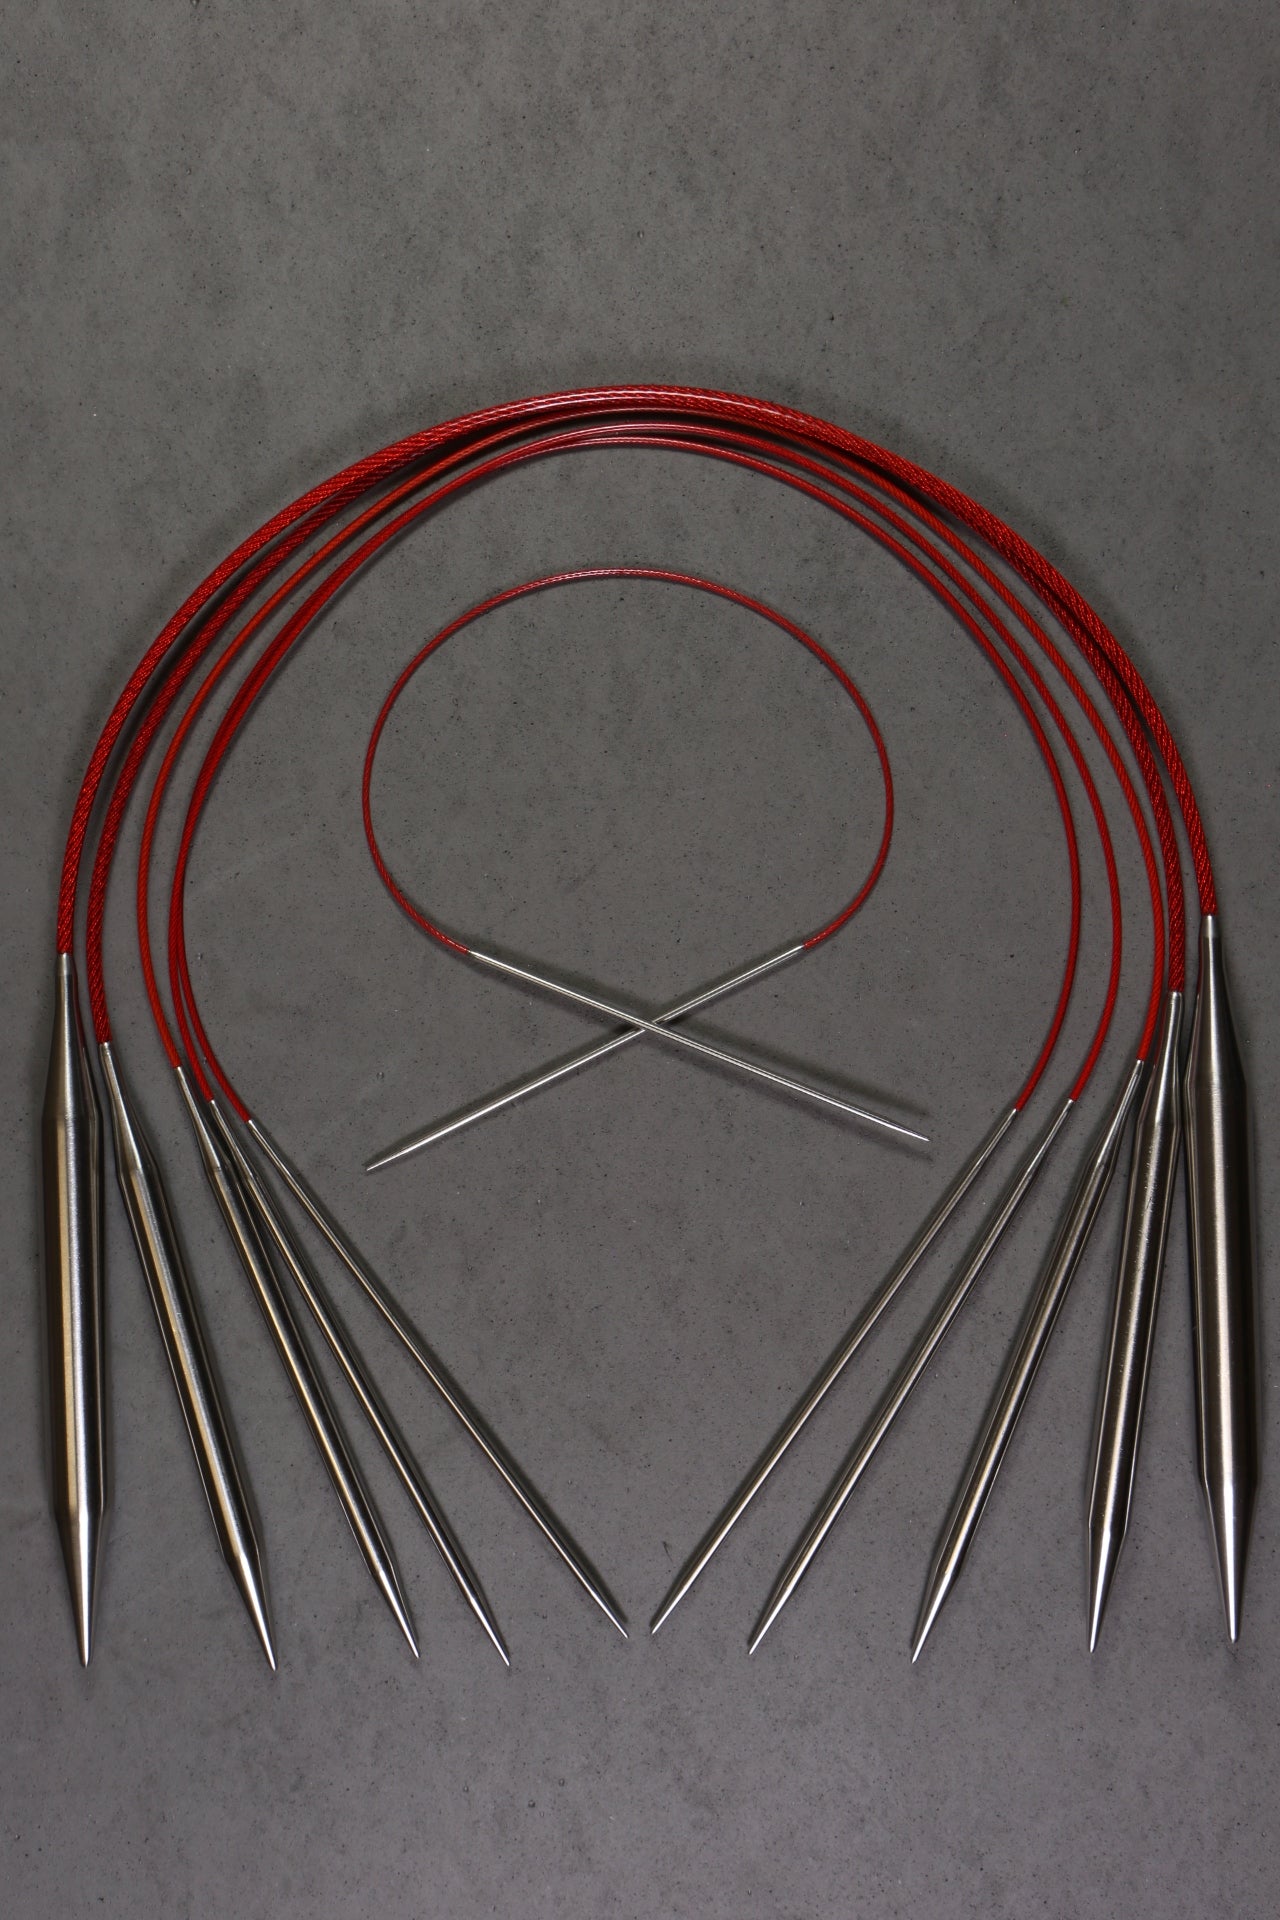 Red Lace Stainless Steel Circular Knitting Needles 40 Size 6/4mm